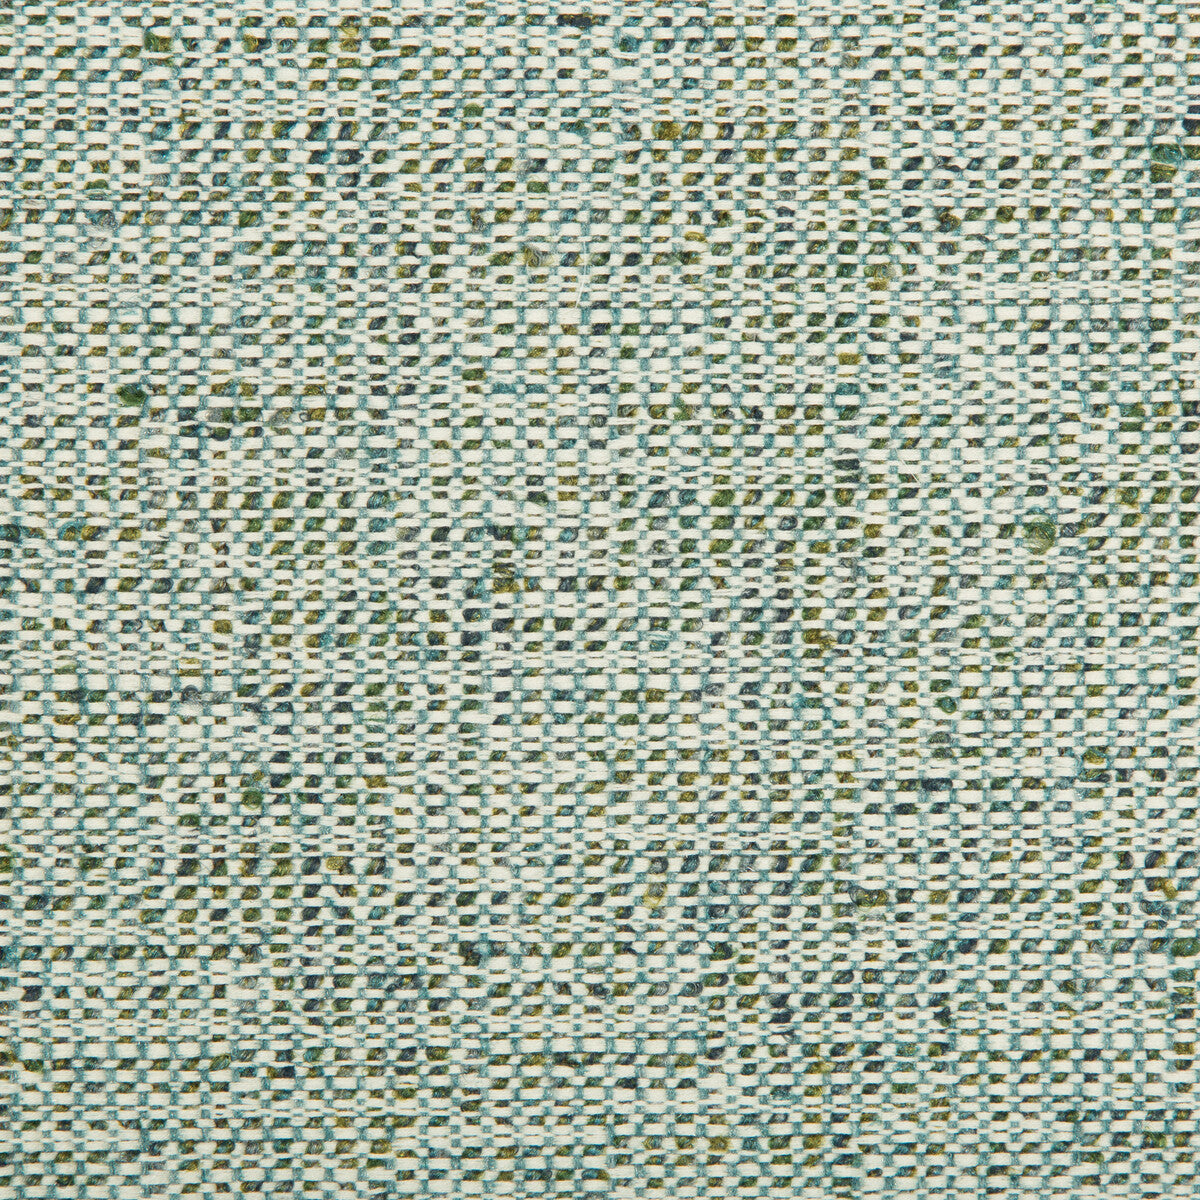 Kravet Contract fabric in 34635-135 color - pattern 34635.135.0 - by Kravet Contract in the Crypton Incase collection